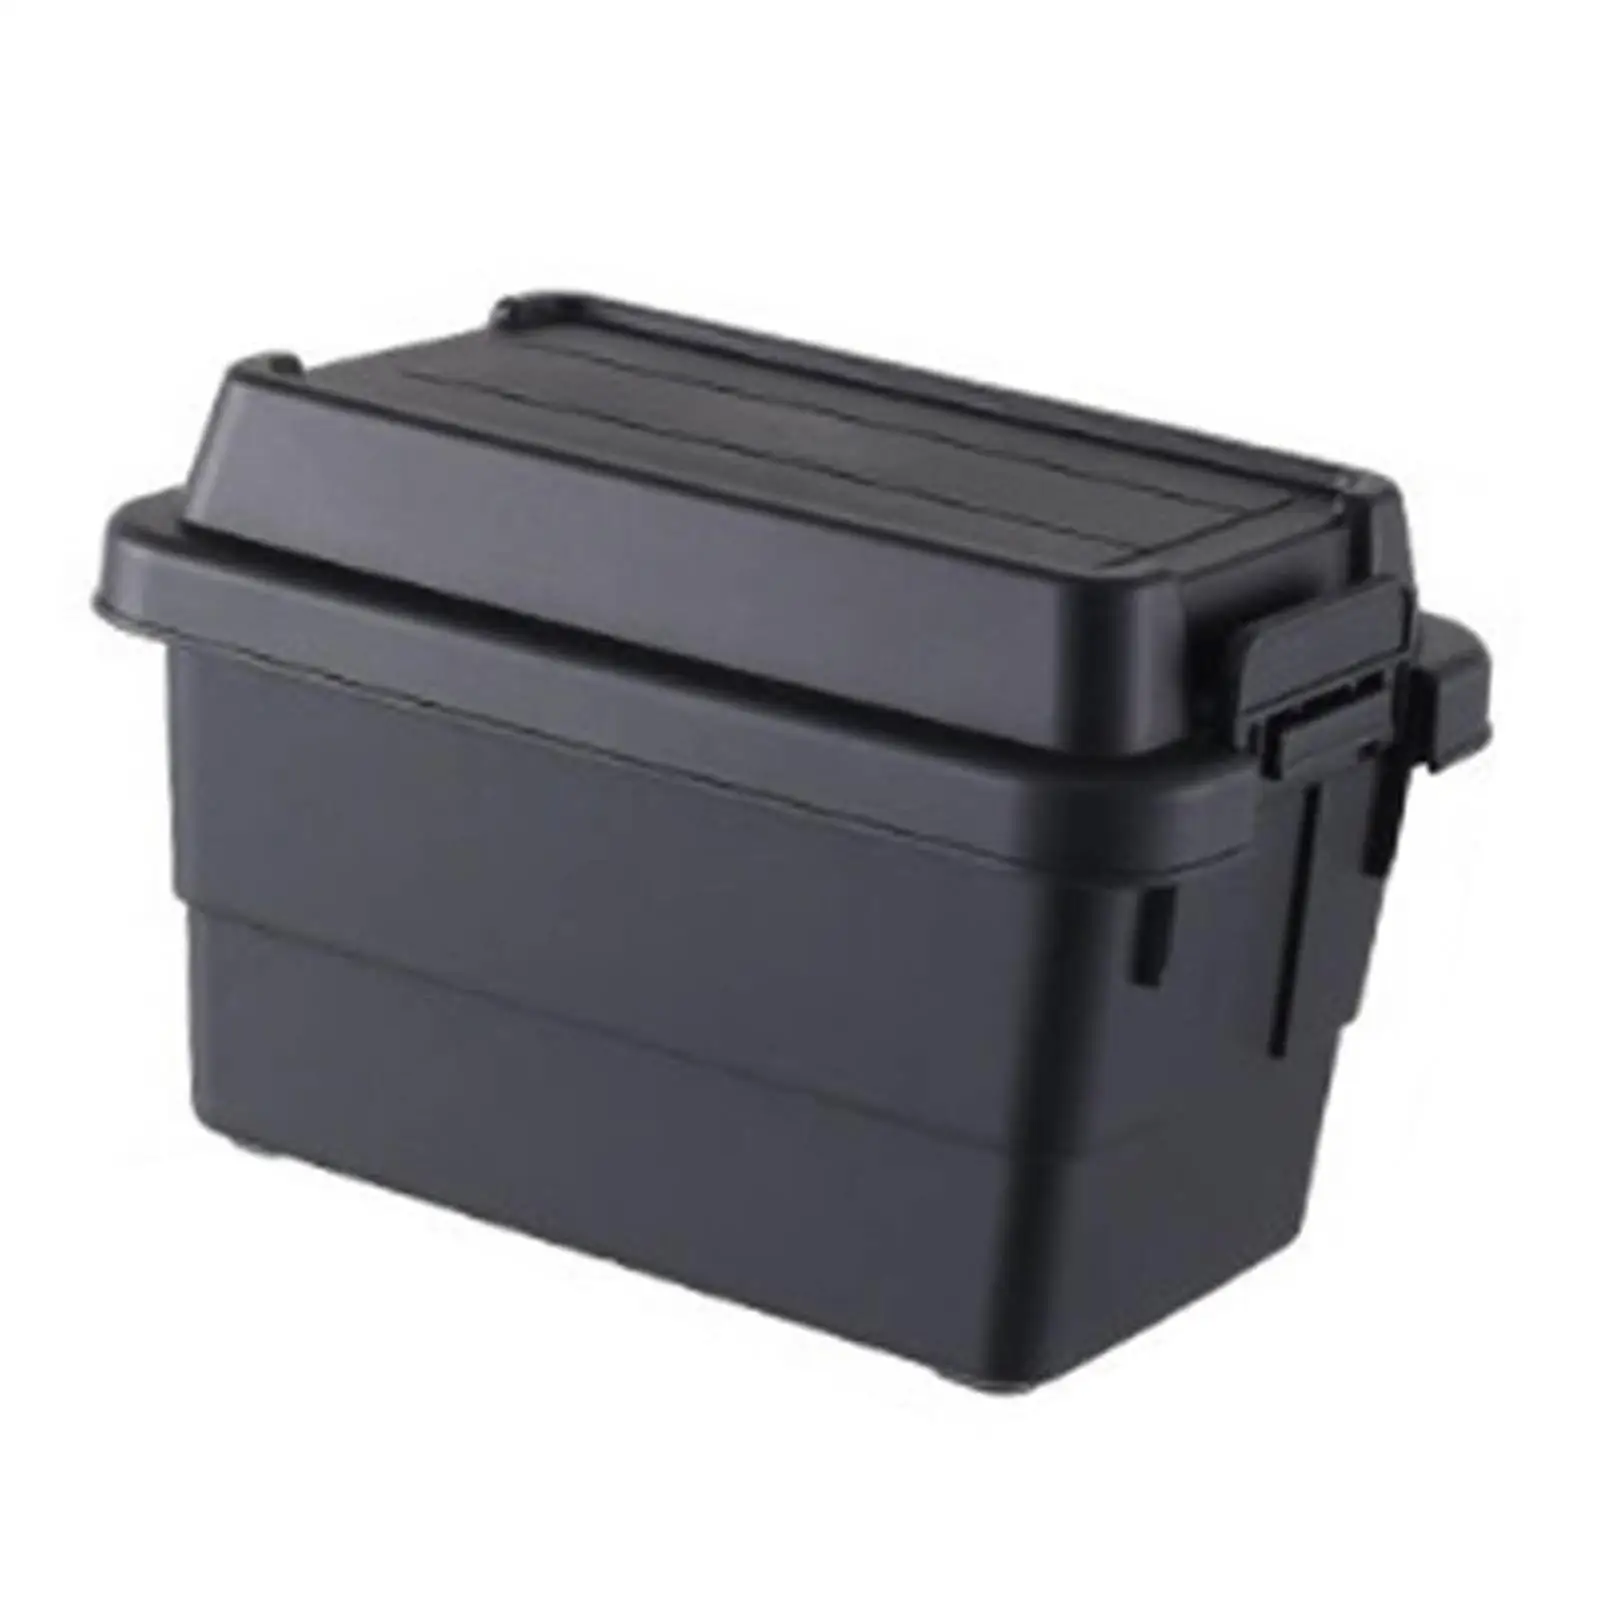 Camping Storage Box Multifunctional Storage Bin with Lid for Travel Hiking Fishing Backpacking Outdoor Activities